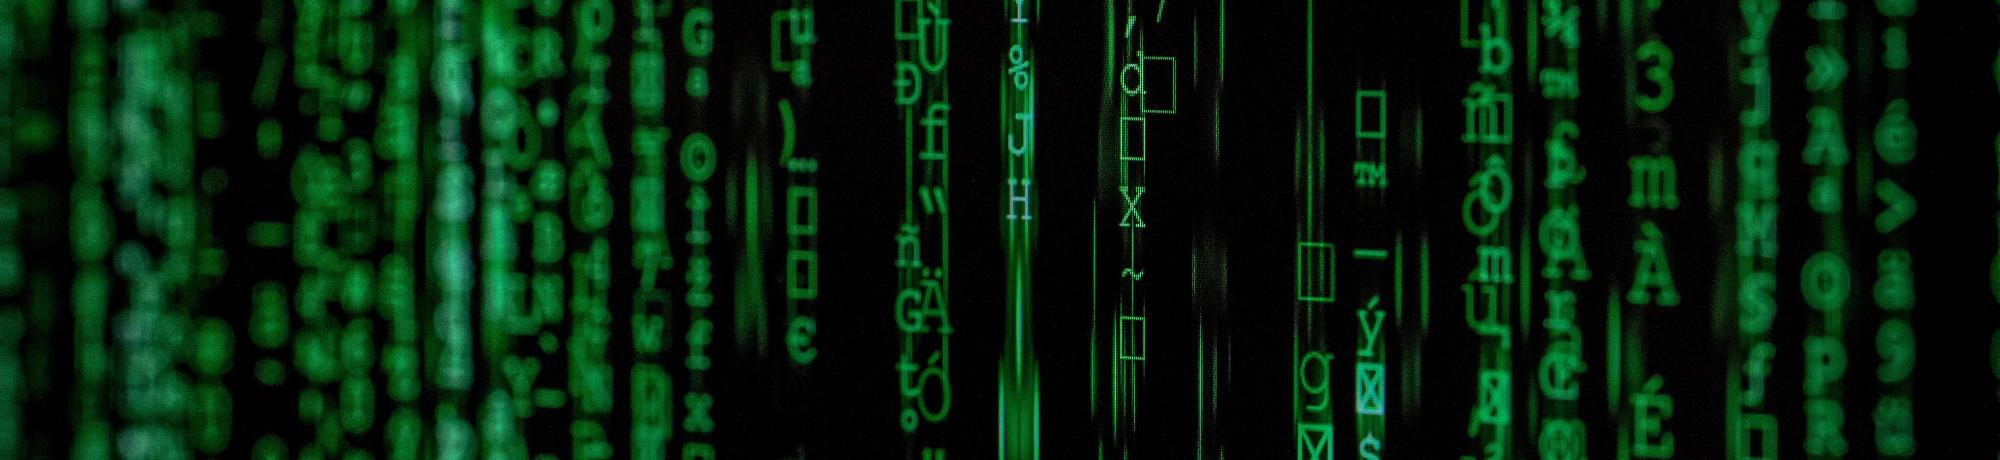 System matrix - green glowing letters on a black screen